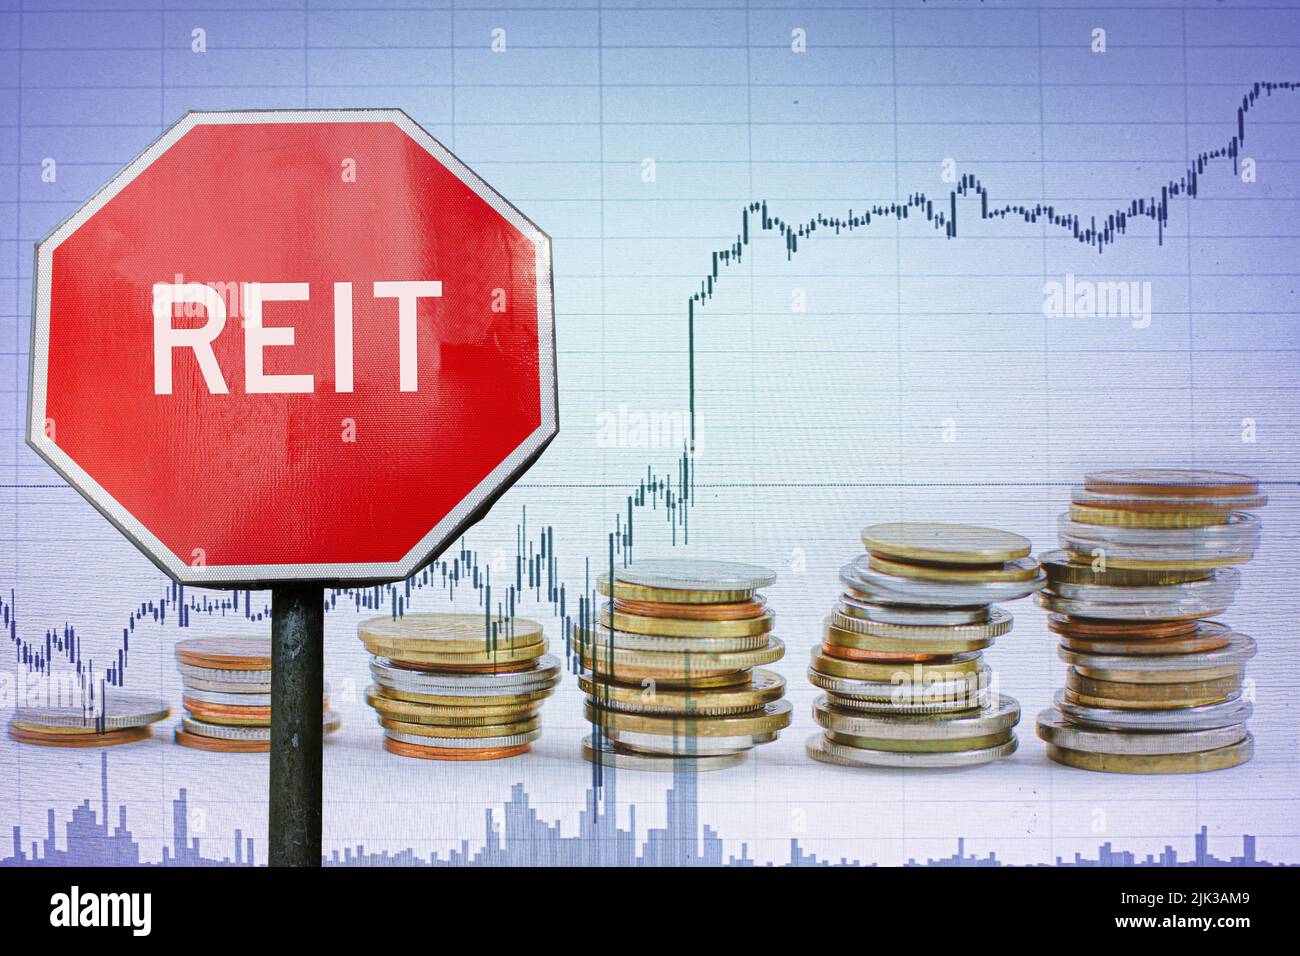 REIT sign on economy background with graph and coins. Stock Photo